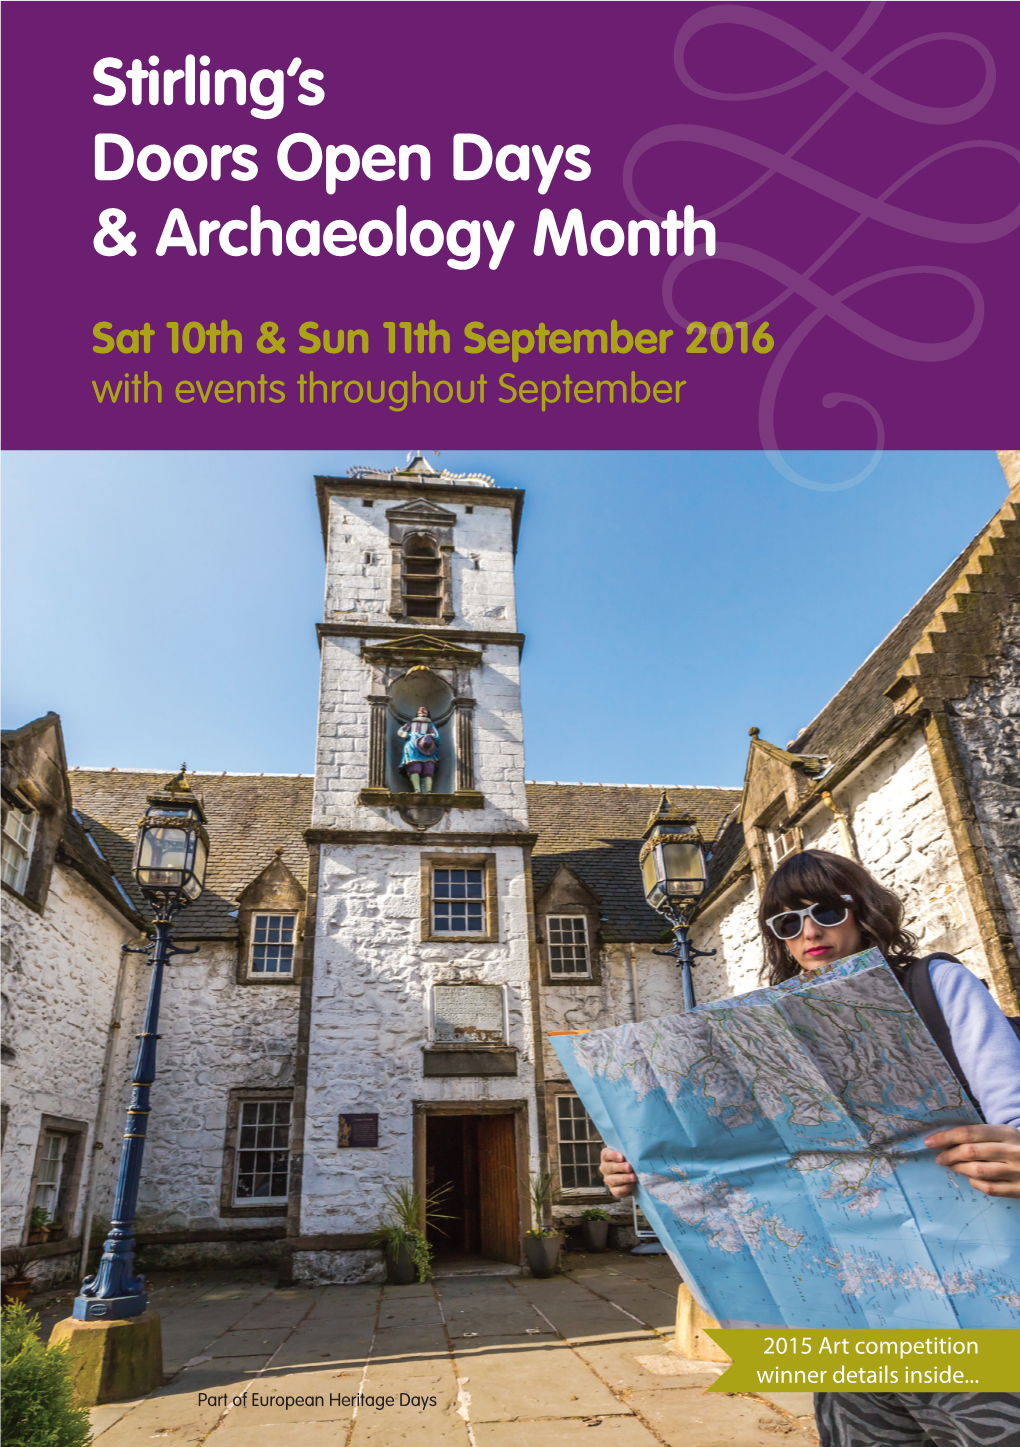 Stirling's Doors Open Days & Archaeology Month